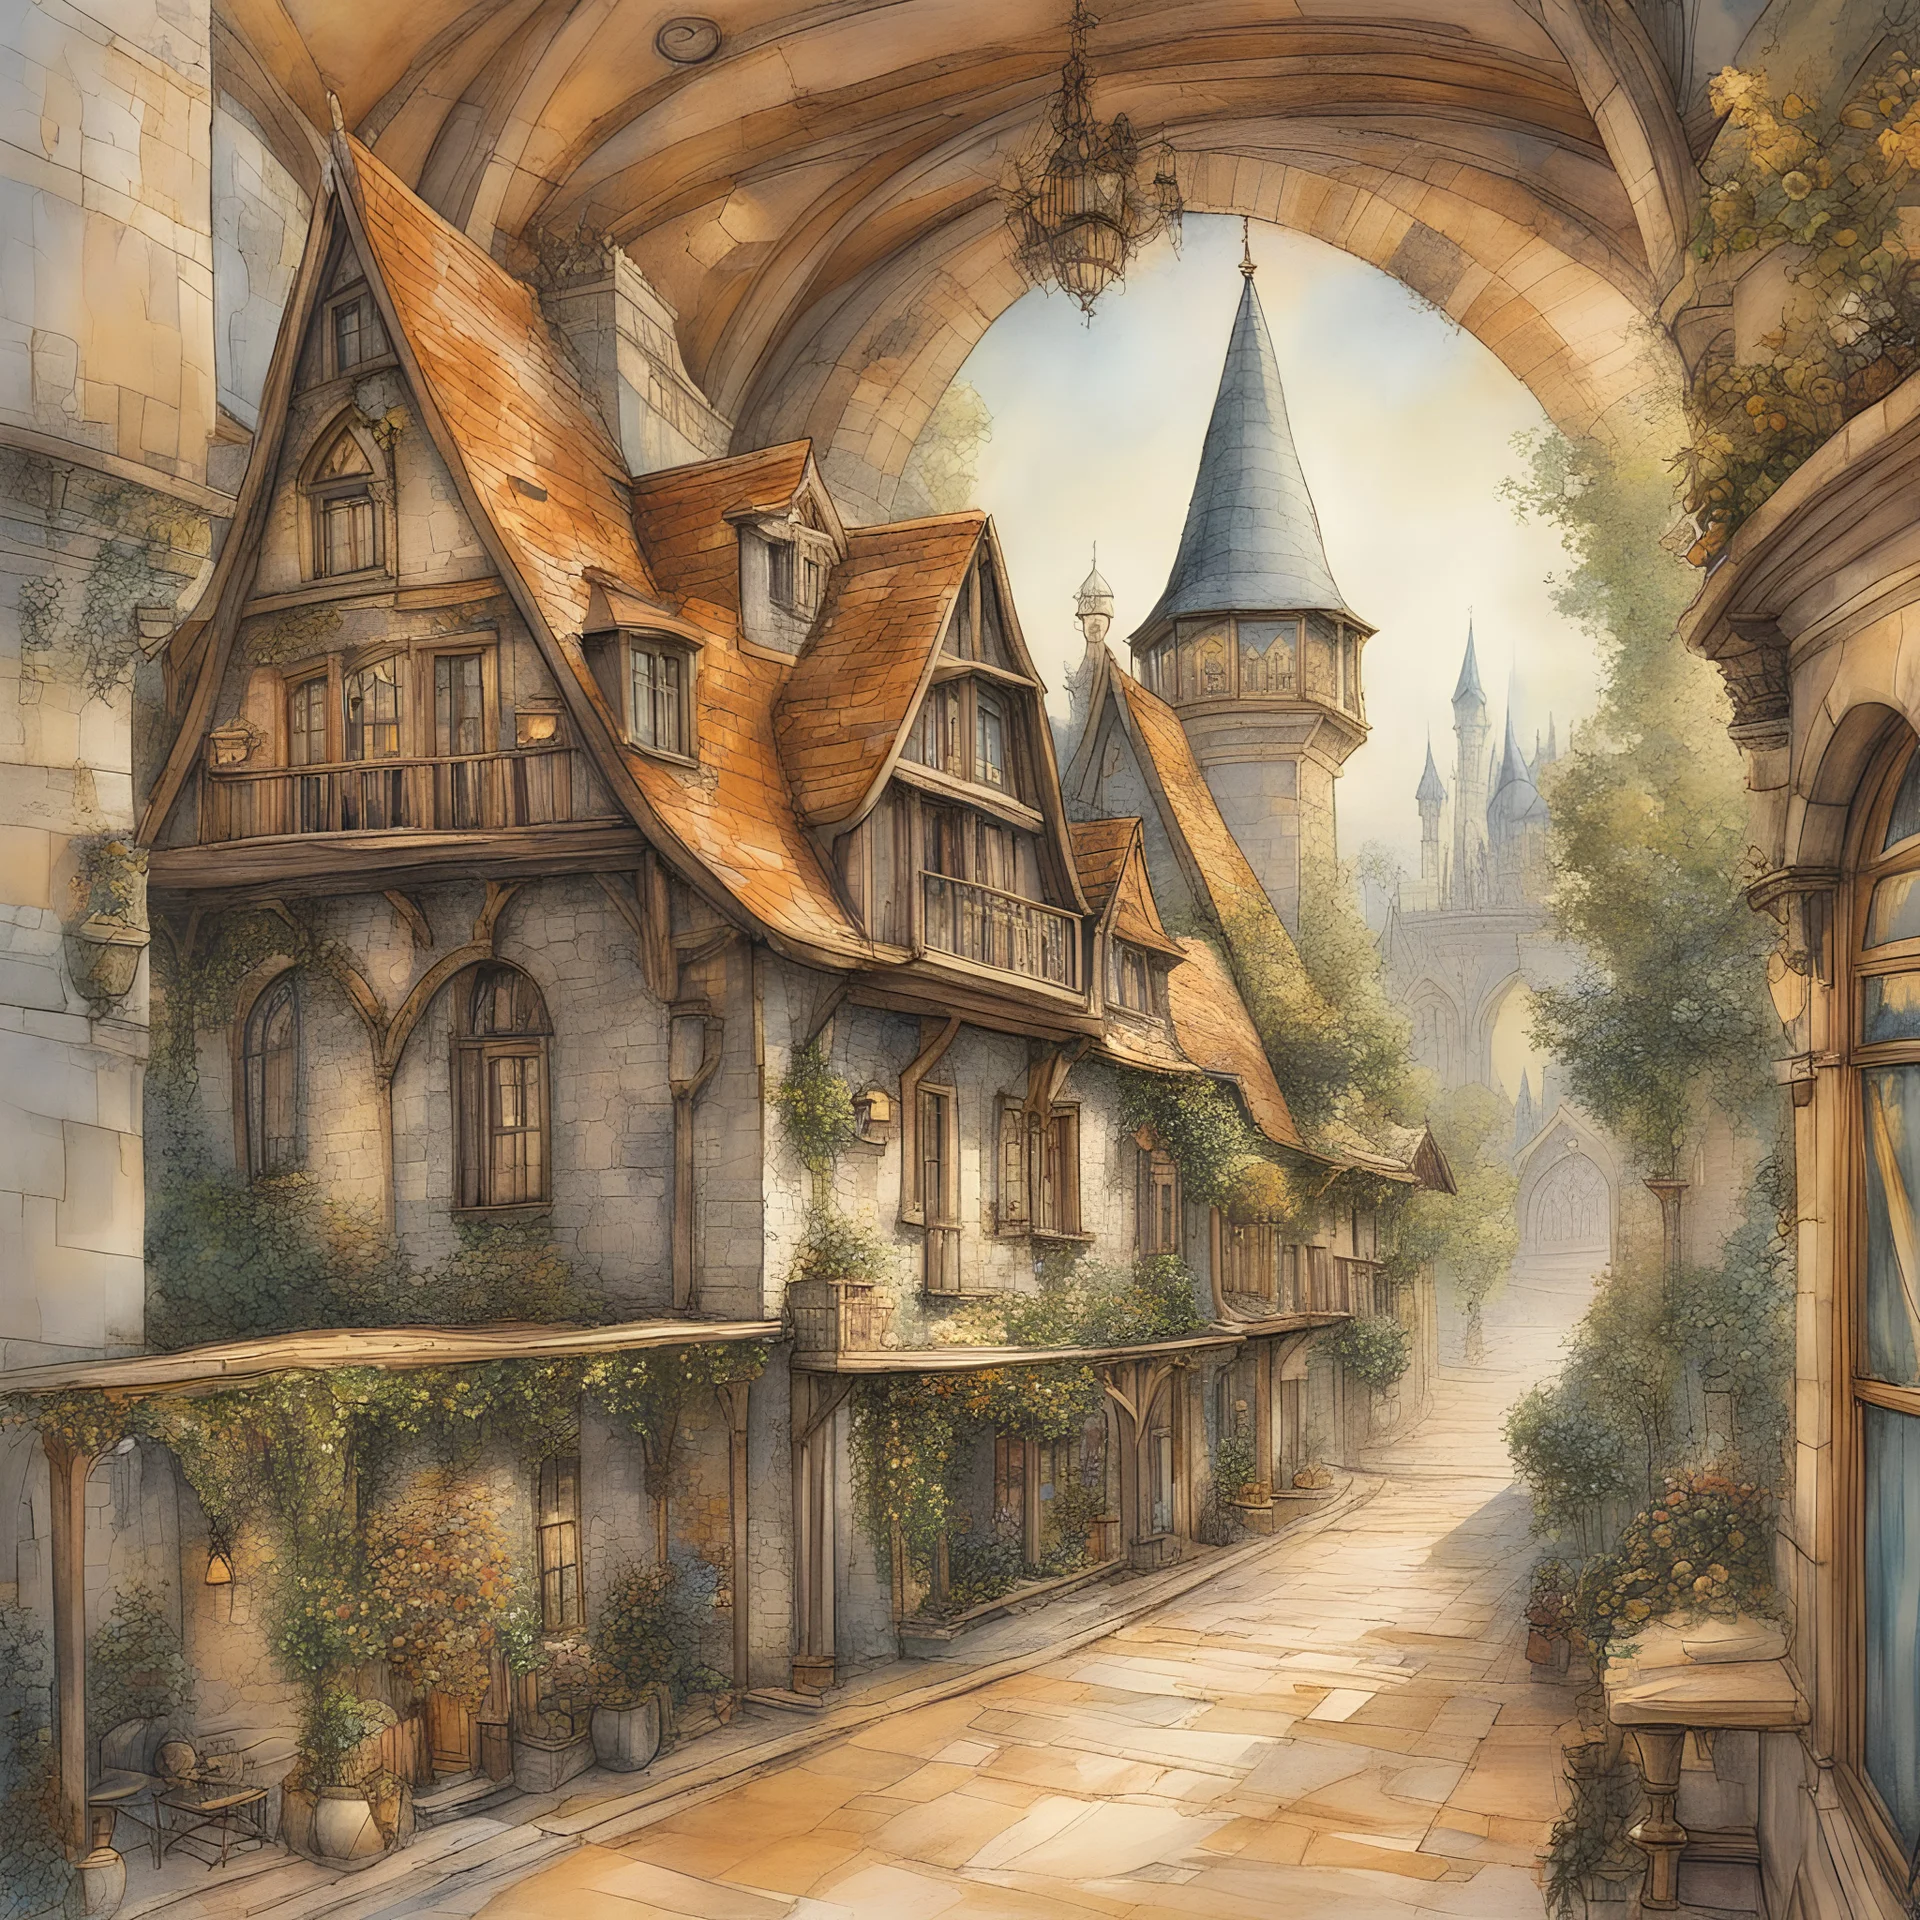 Style Cézanne, luxury, dream world, calm beauty, fantasy world, magic, beautiful composition, exquisite detail, Fantasy city, steampunk, elven, sketch drawing, lineart, watercolour